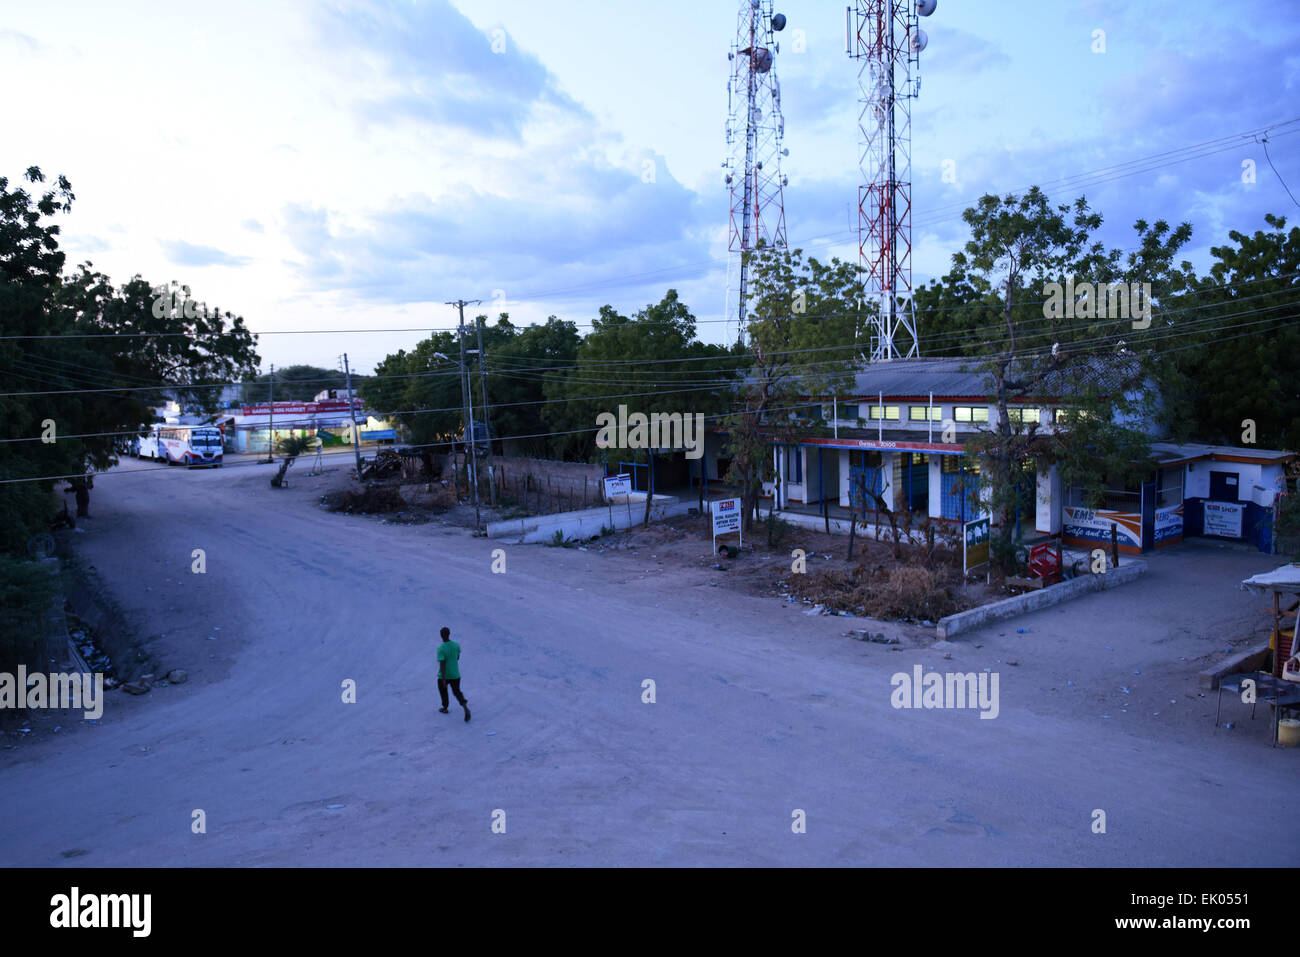 Garissa, Kenya. 3rd Apr, 2015. A man walks on an empty street shortly after a curfew is in effect in Garissa, Kenya, April 3, 2015. A two-week-long curfew was imposed from Friday on Carissa and three other counties in northeastern Kenya. Credit:  Sun Ruibo/Xinhua/Alamy Live News Stock Photo